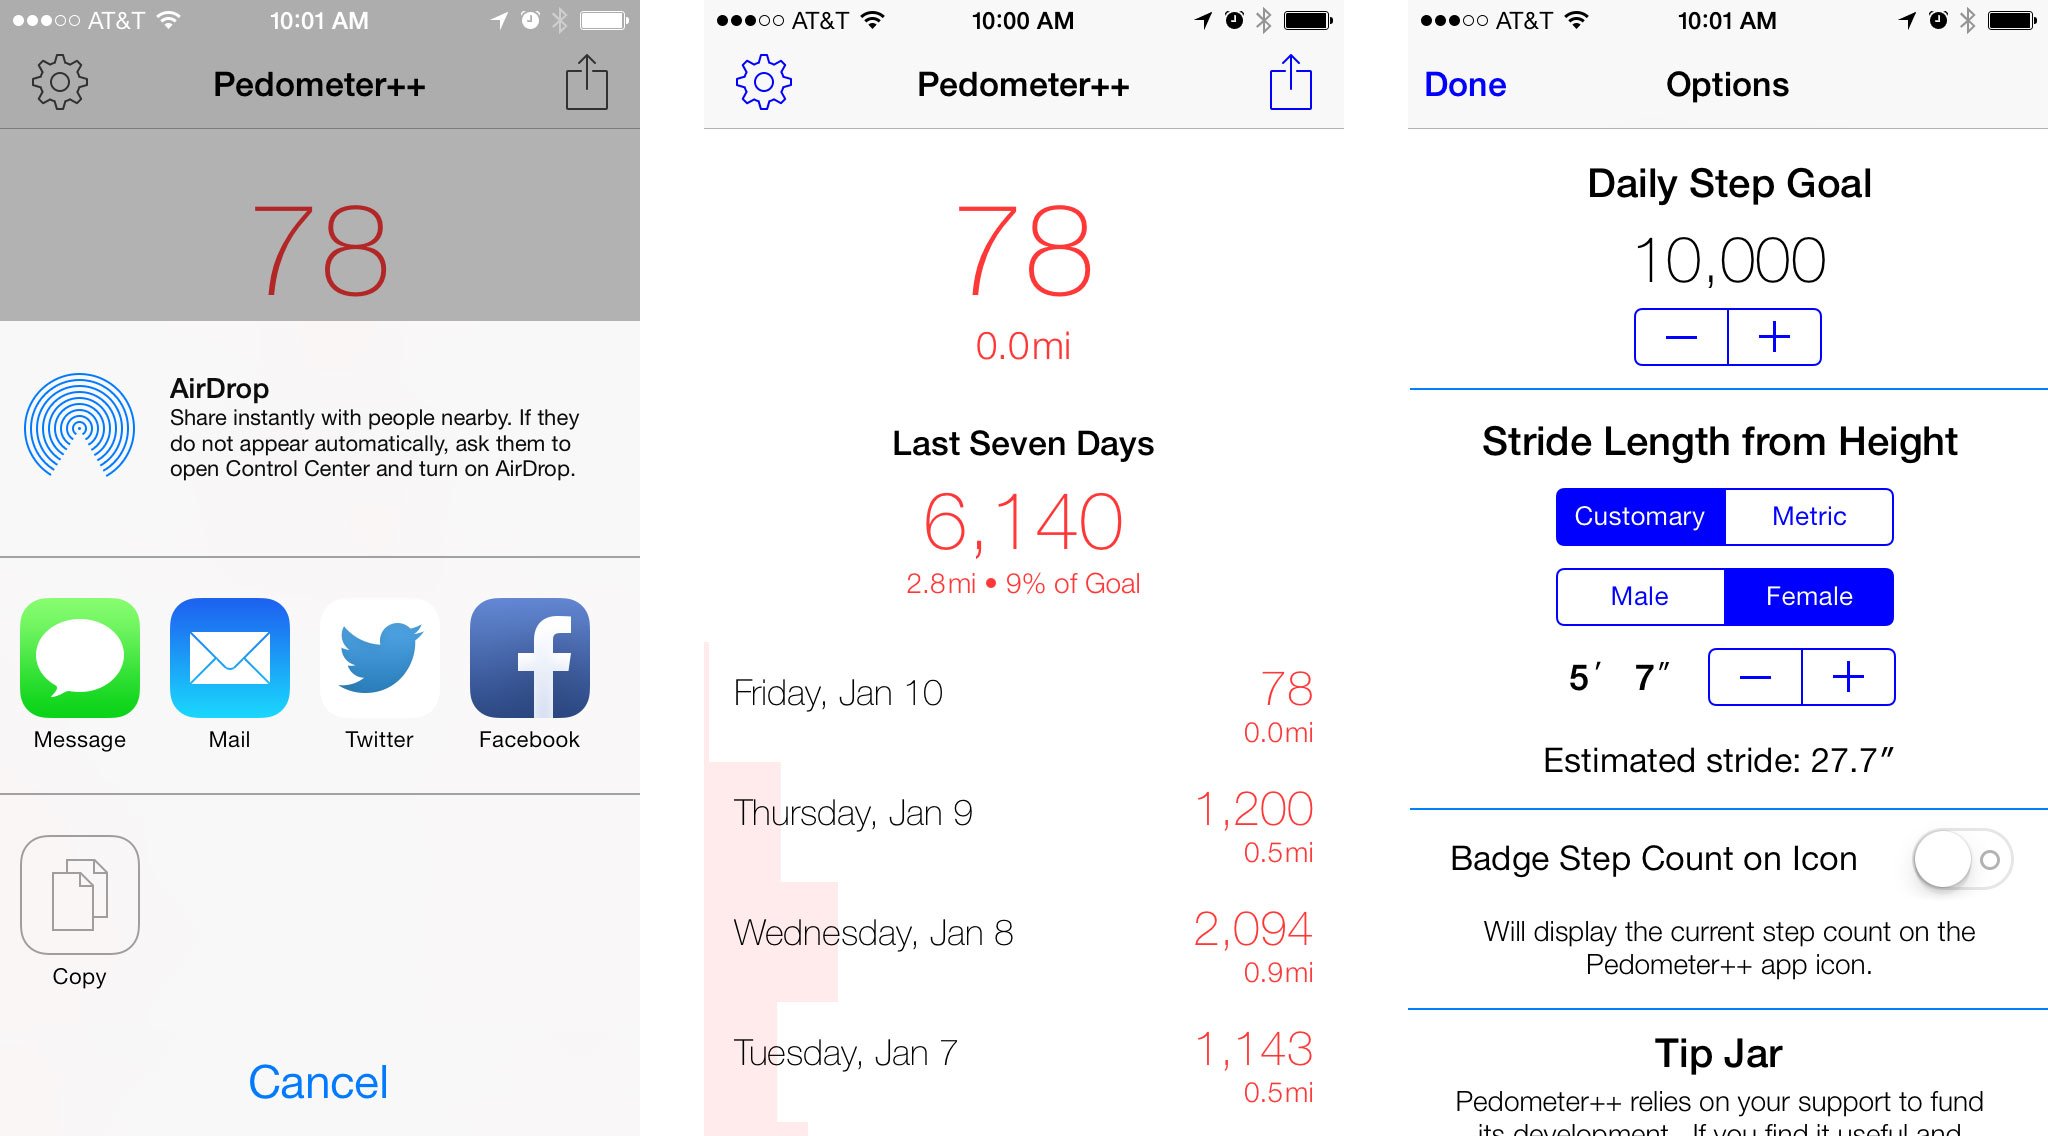 Best activity tracker apps for iPhone: Pedometer++